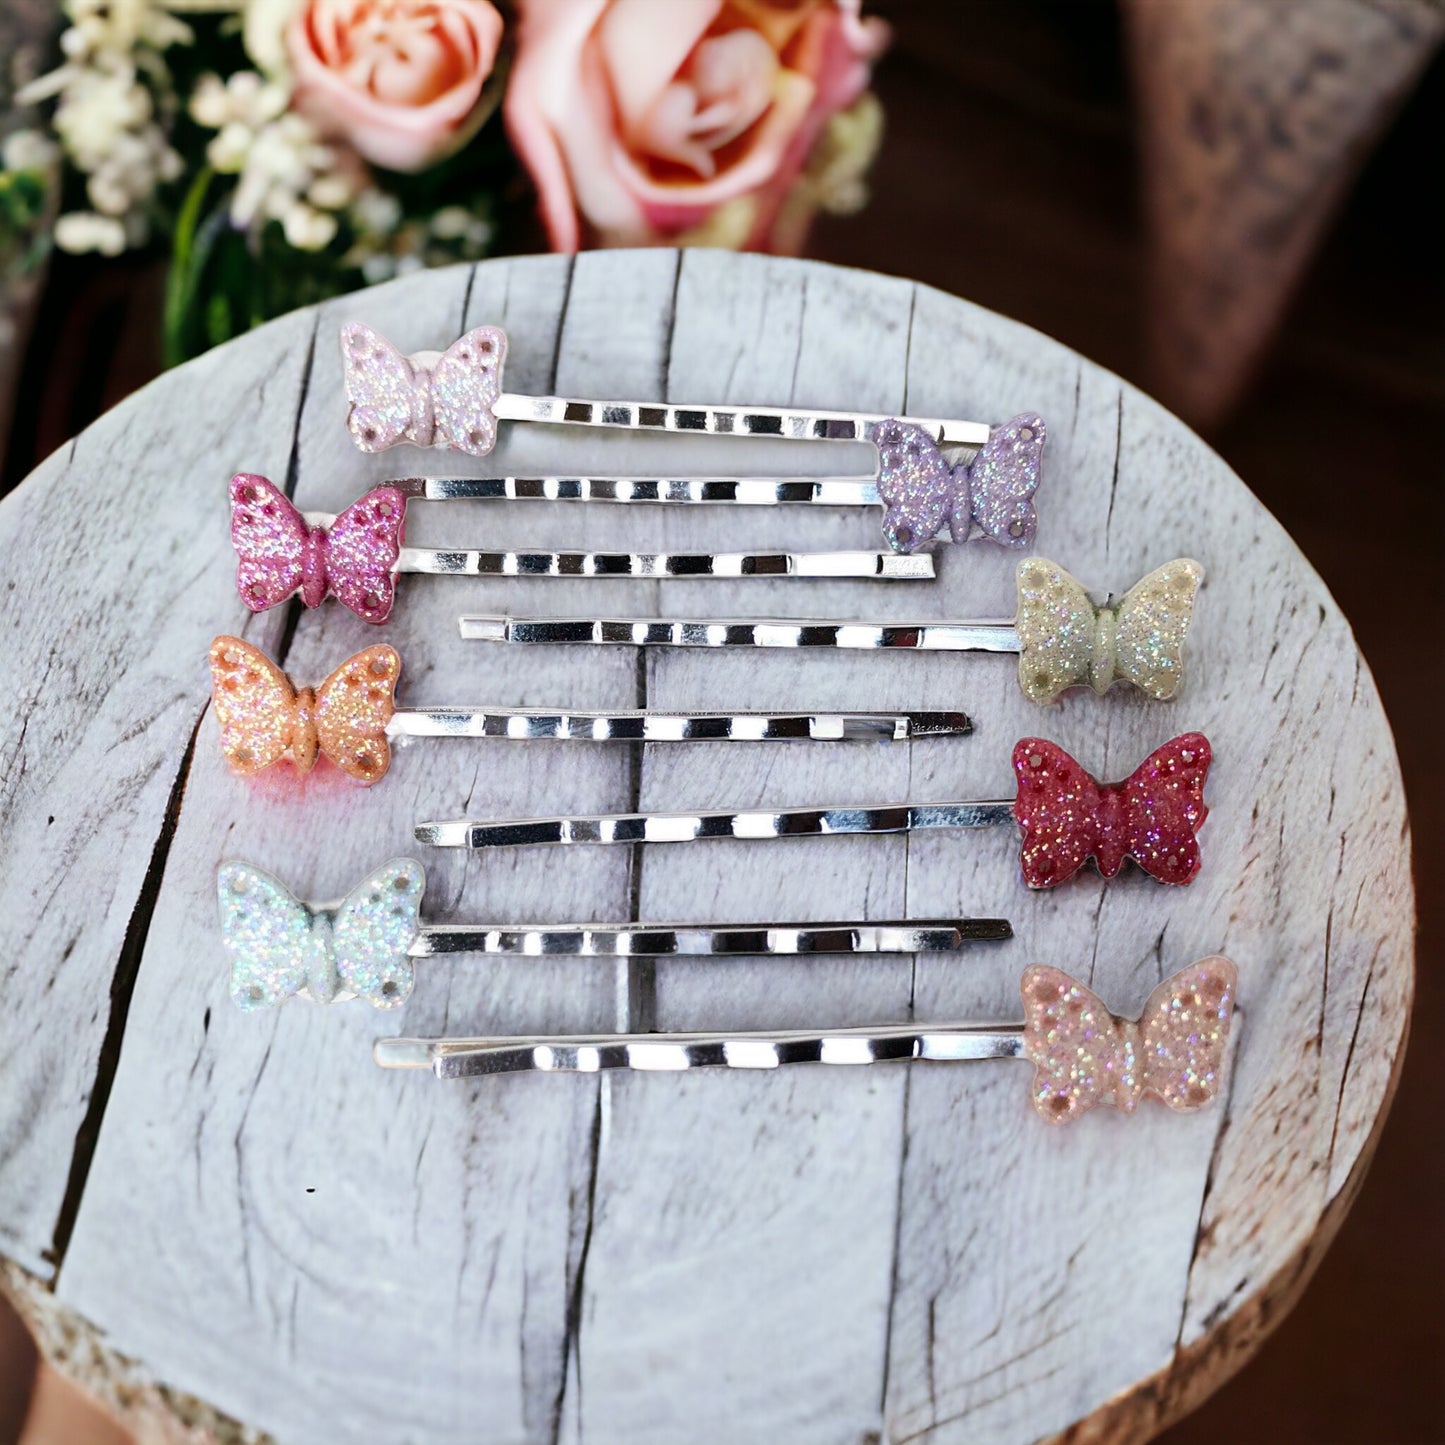 Tiny Butterfly Hair Pins Set of 8 - Glittery Array of Colors for Delicate & Whimsical Hairstyles